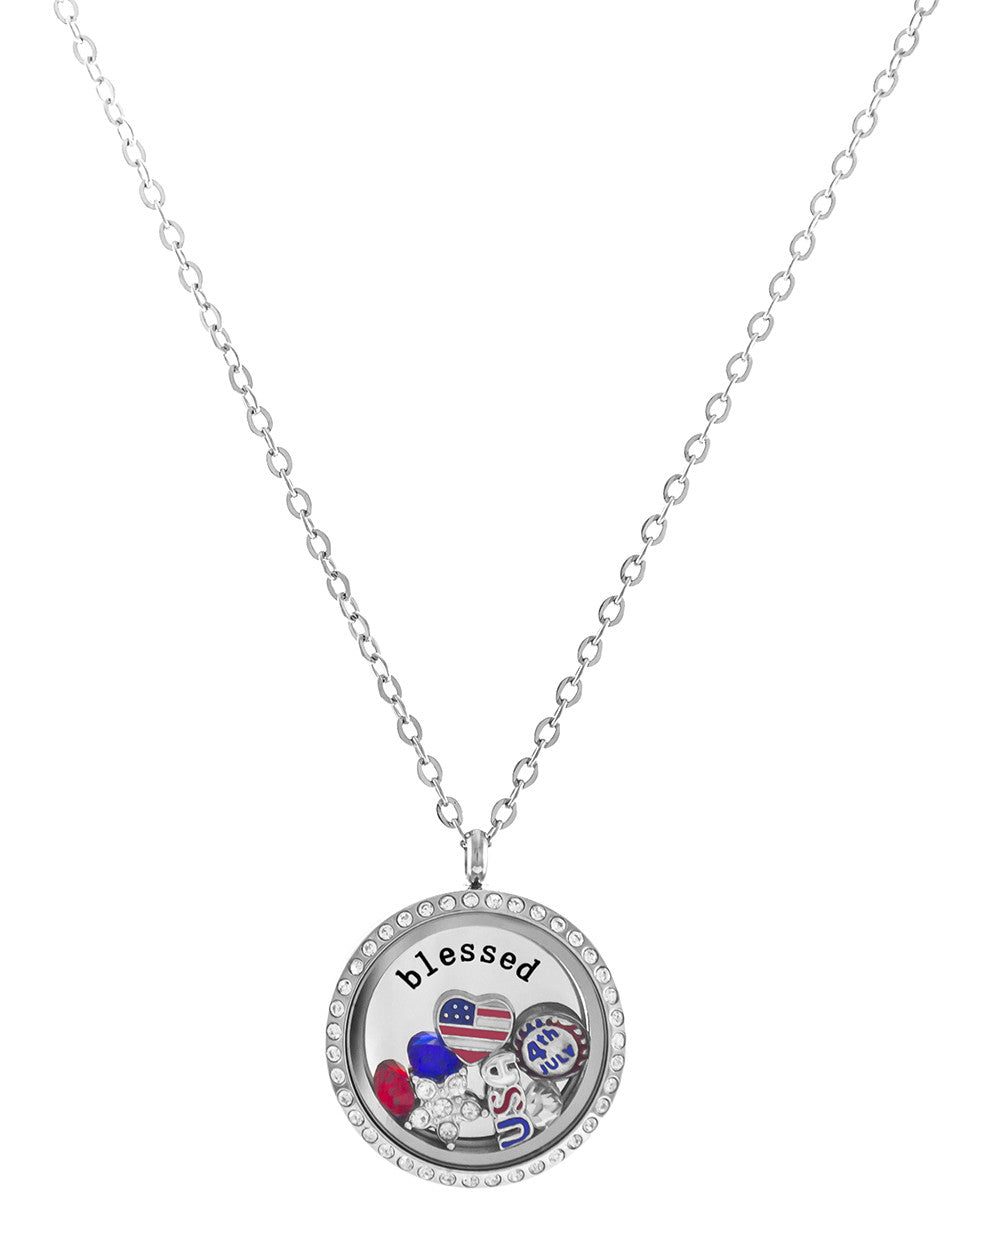 Stainless Steel Floating Charm Locket 4th of July Celebration Necklace by BG247®